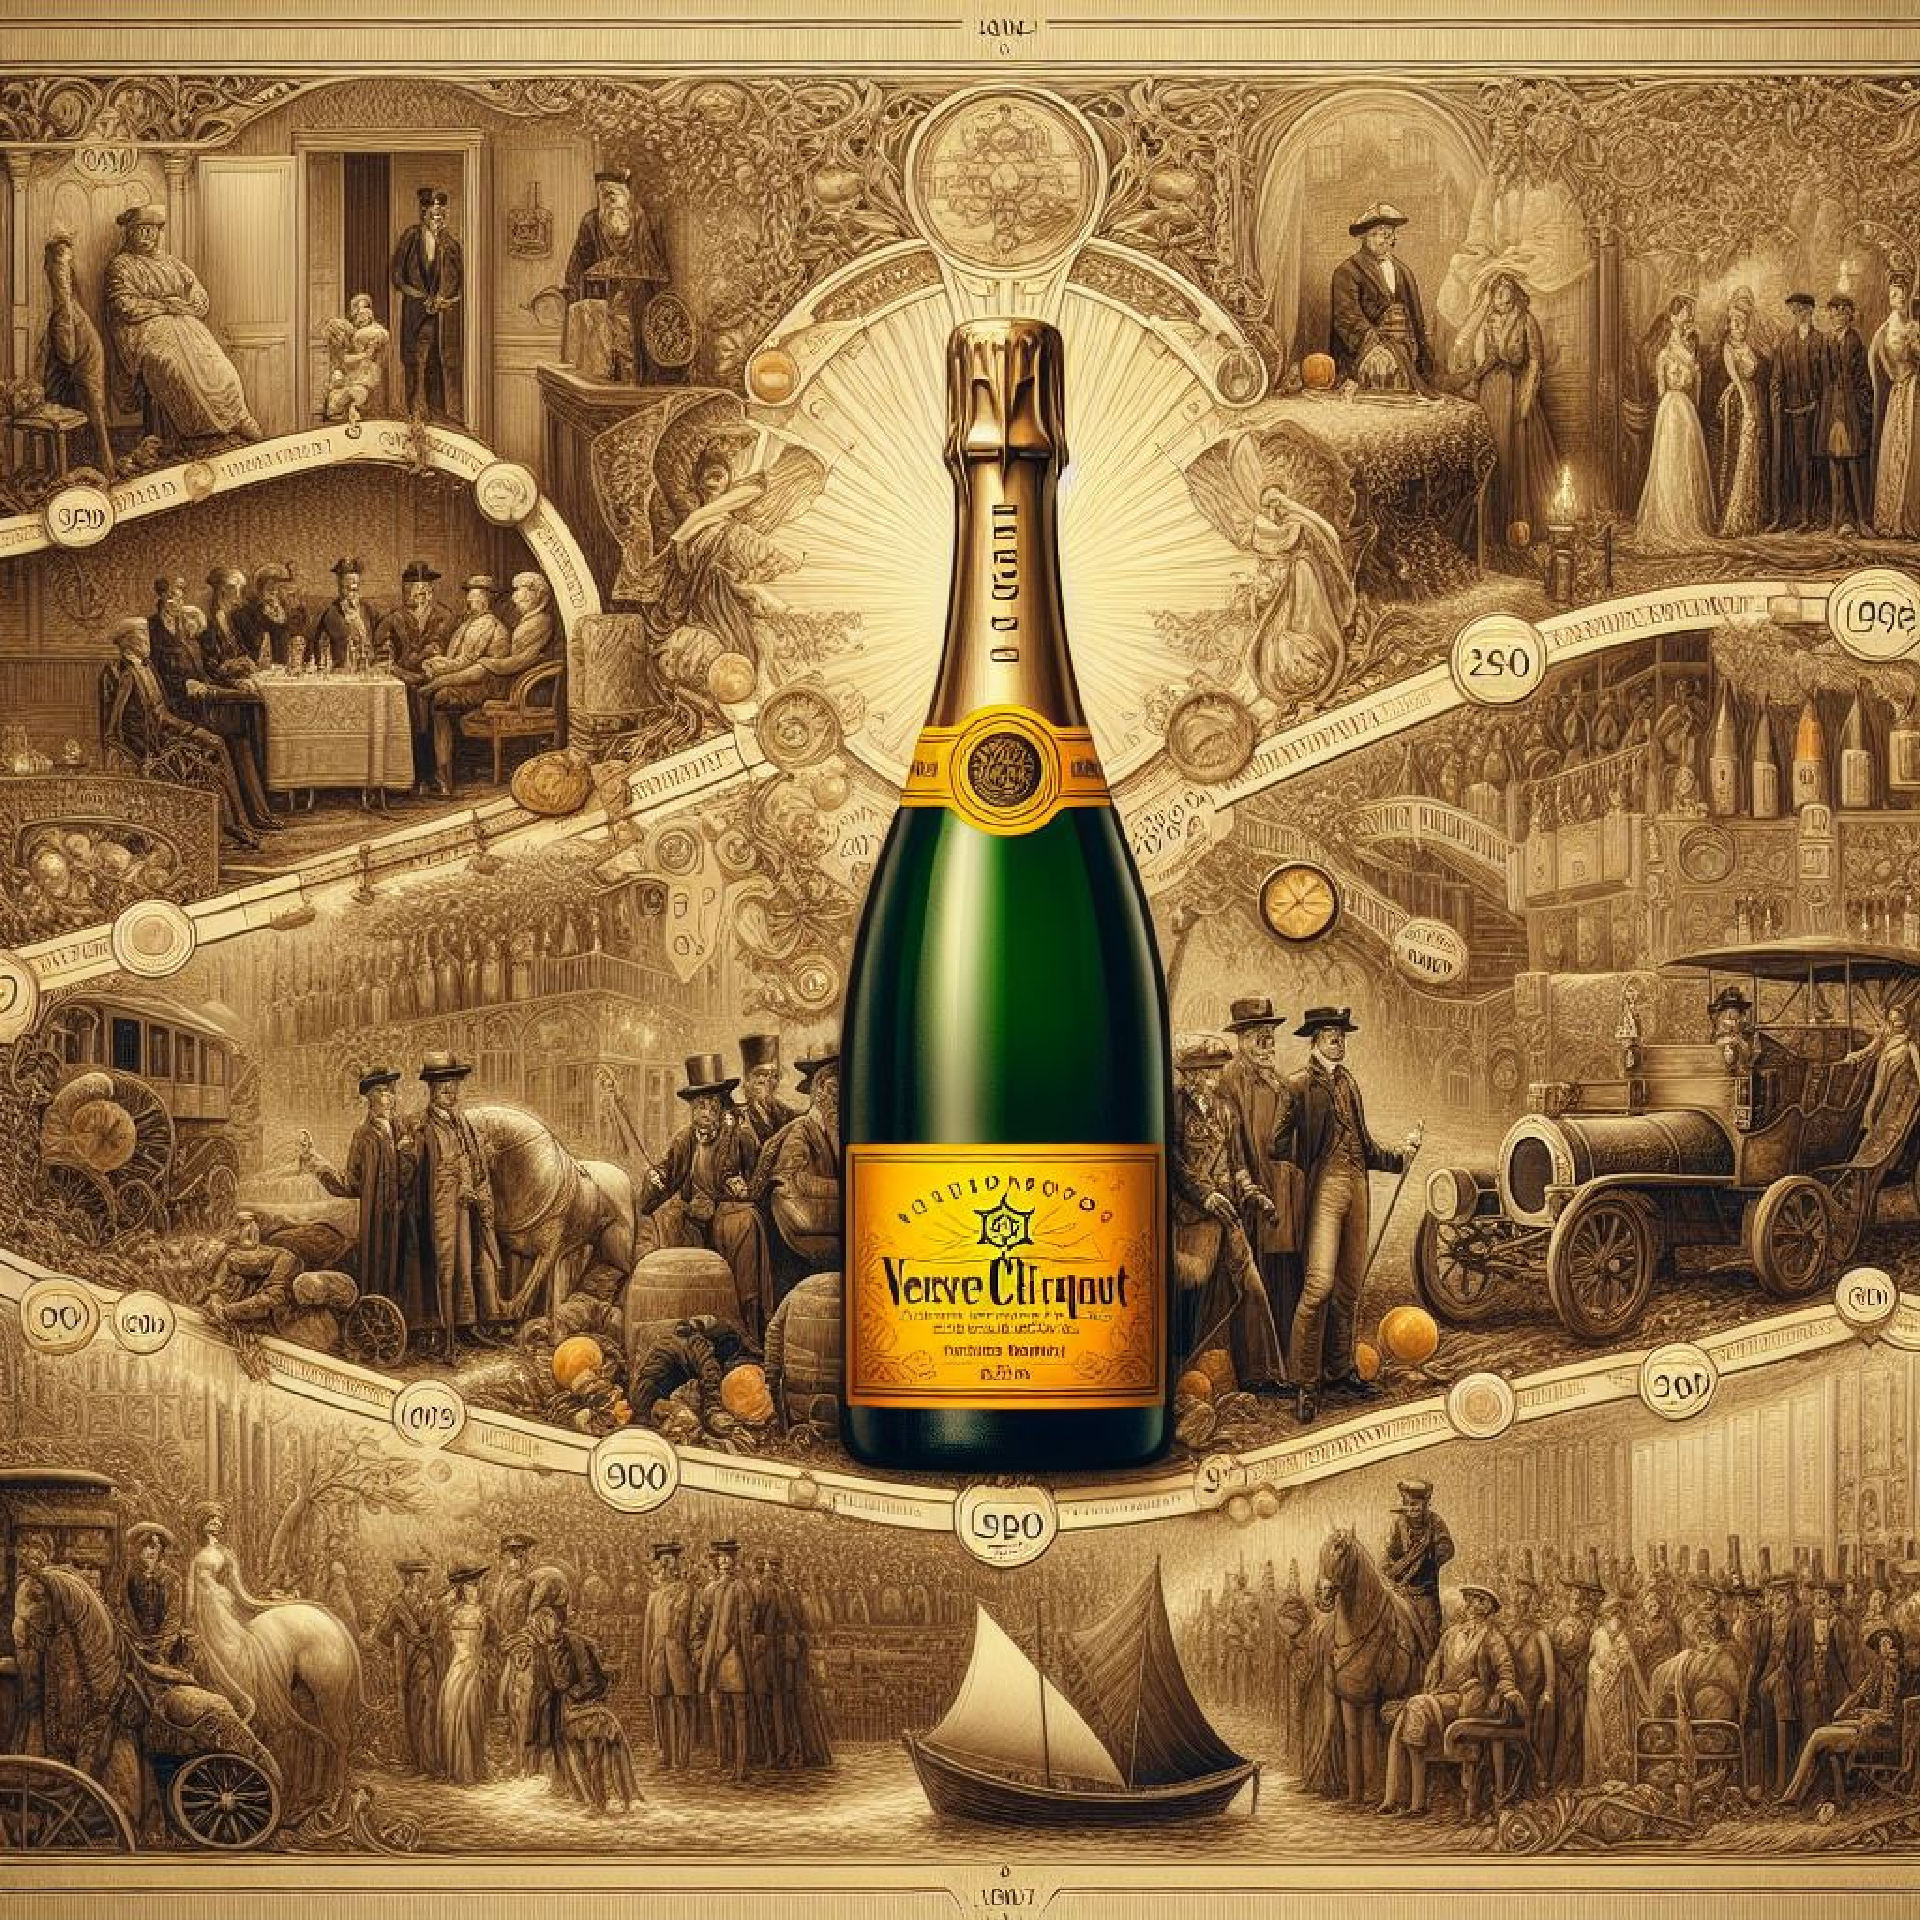 Elegant display of various Veuve Clicquot wines, showcasing their diverse types and rich heritage.